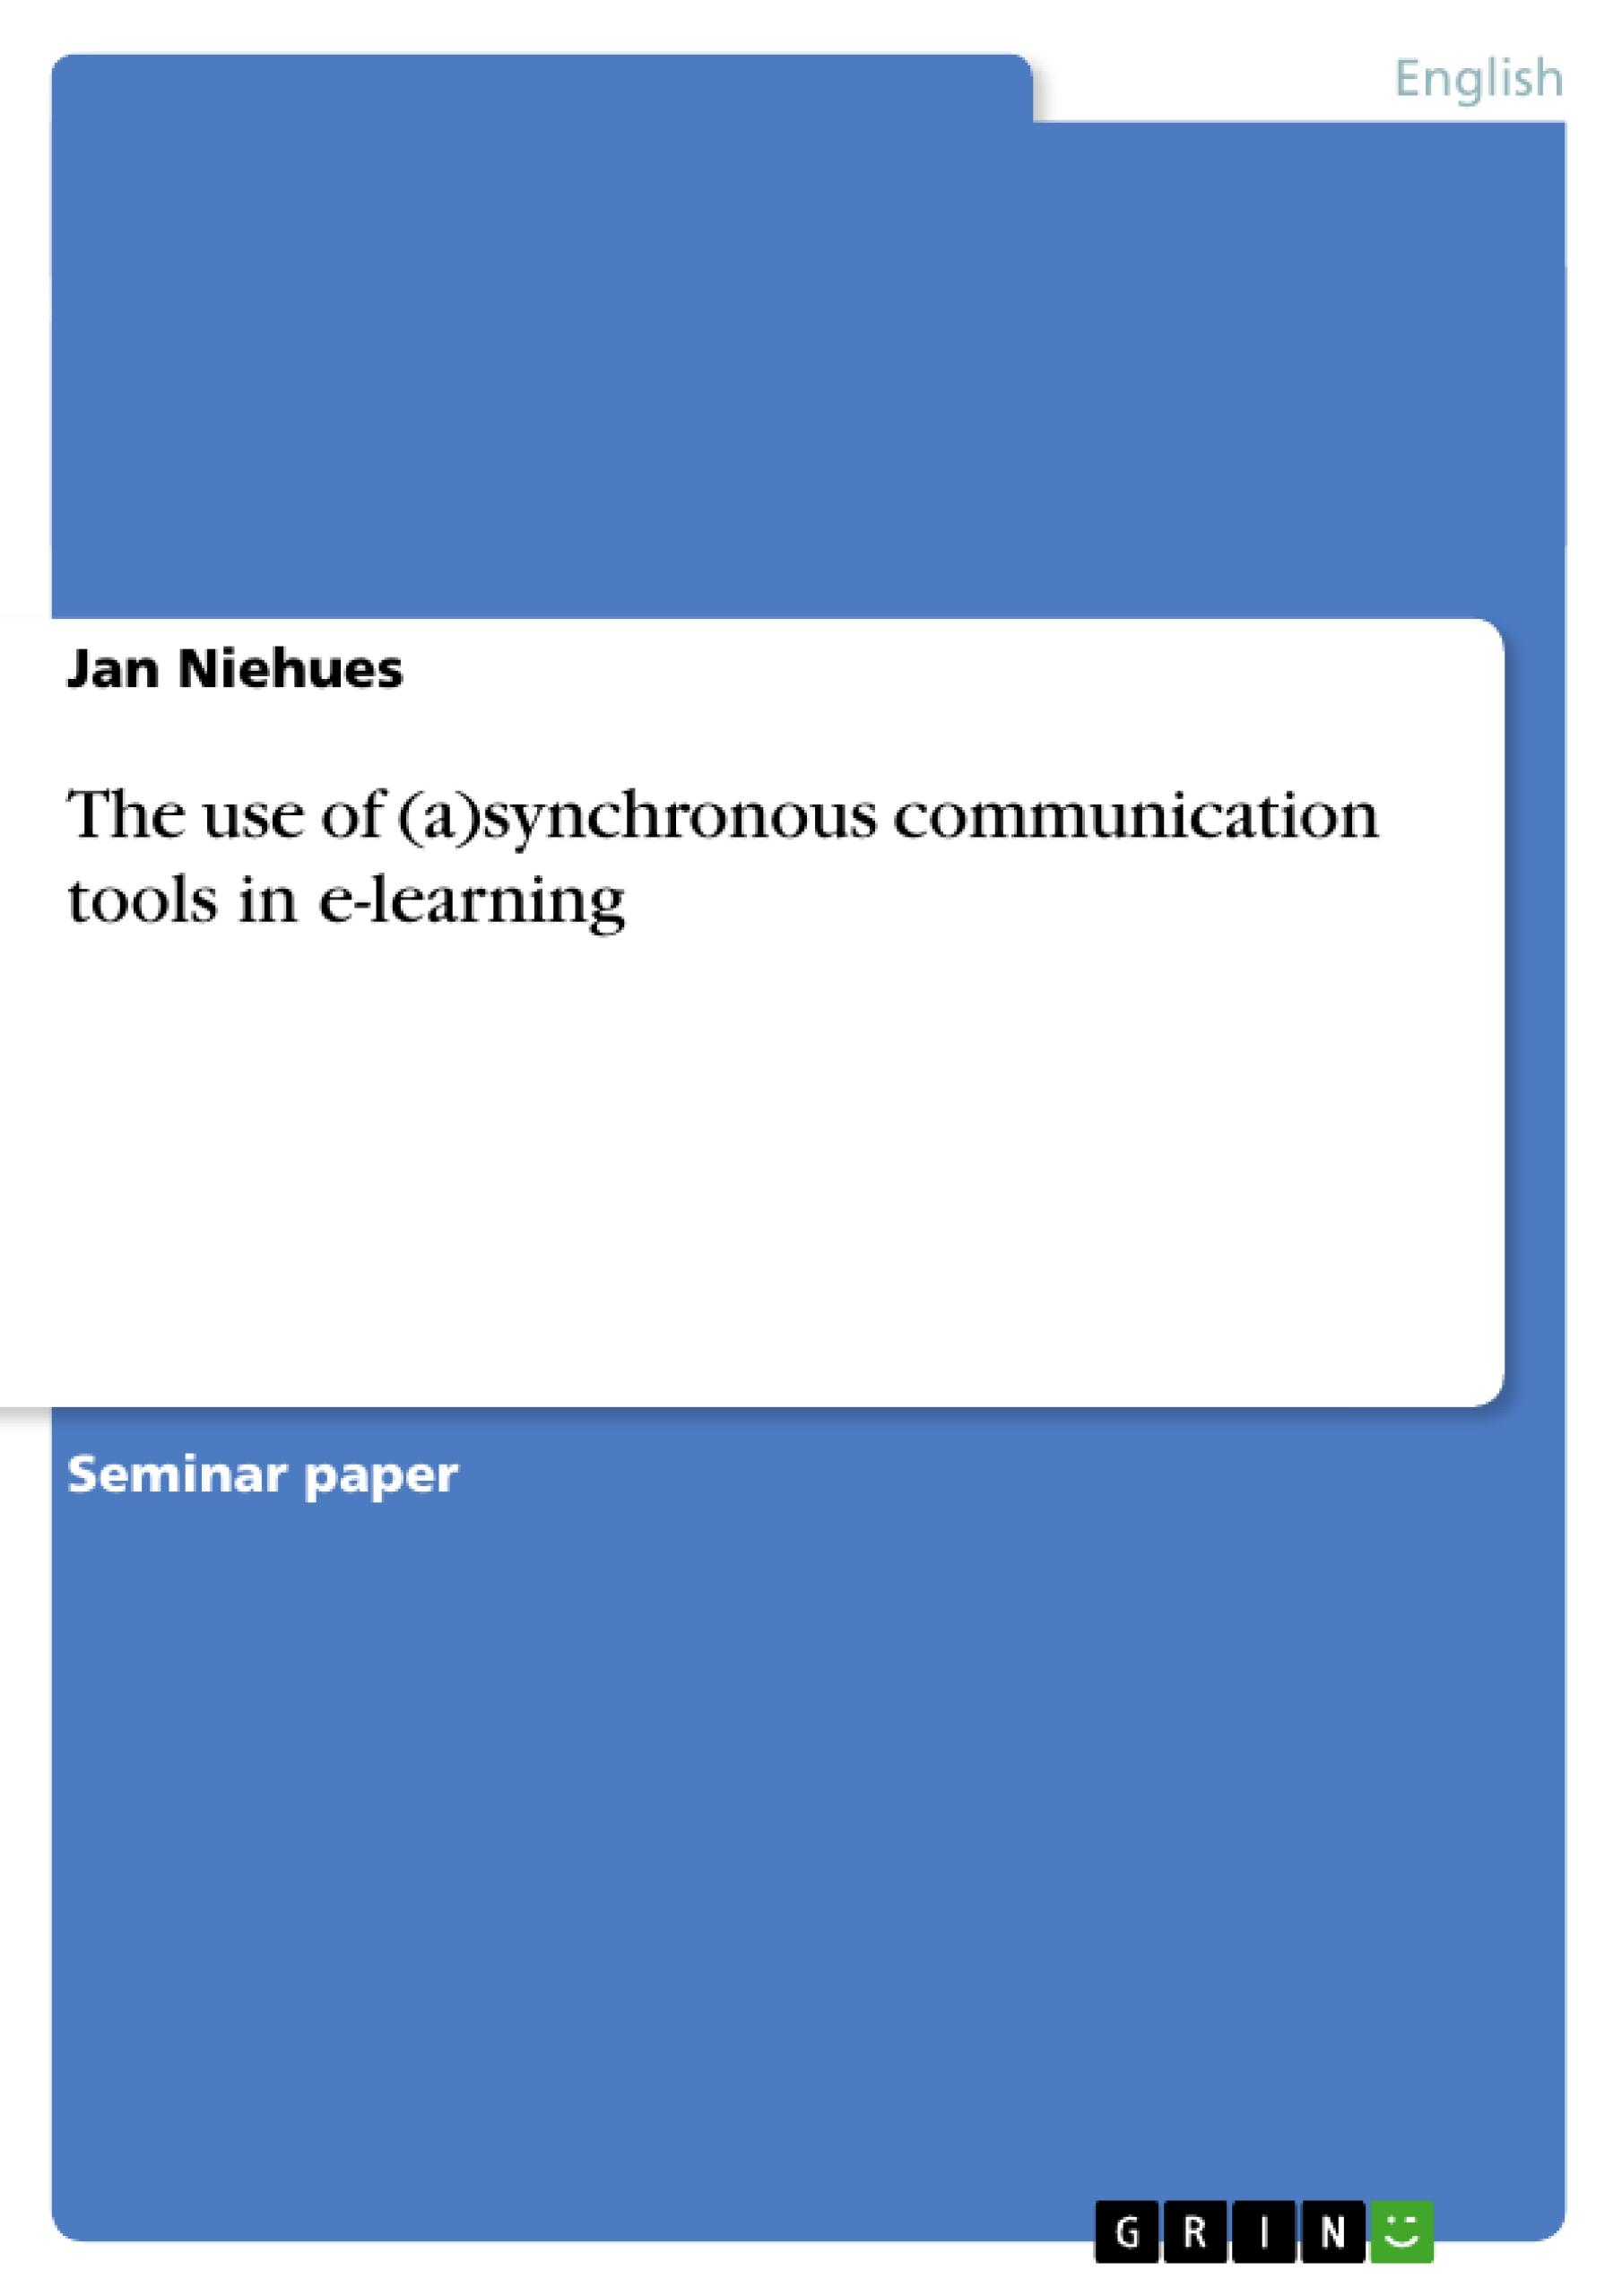 The use of (a)synchronous communication tools in e-learning | Jan Niehues | Taschenbuch | Paperback | Englisch | 2007 | GRIN Verlag | EAN 9783638813686 - Niehues, Jan